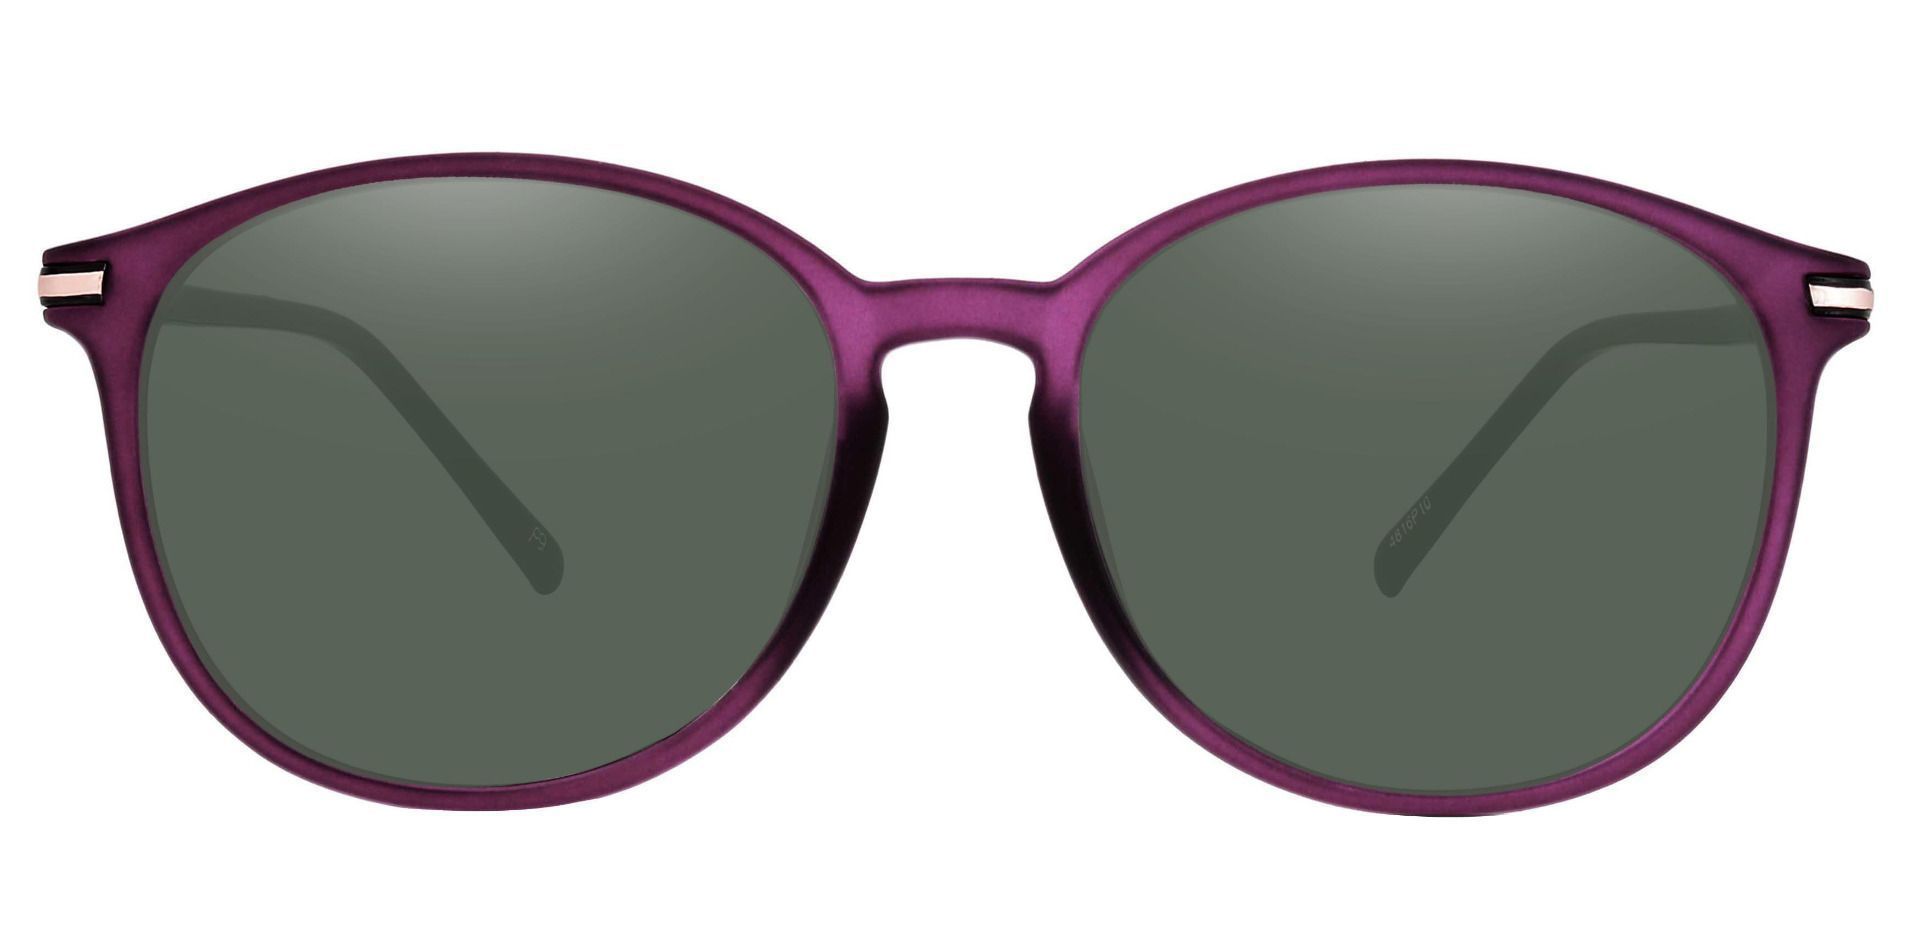 Danbury Oval Lined Bifocal Sunglasses - Purple Frame With Green Lenses